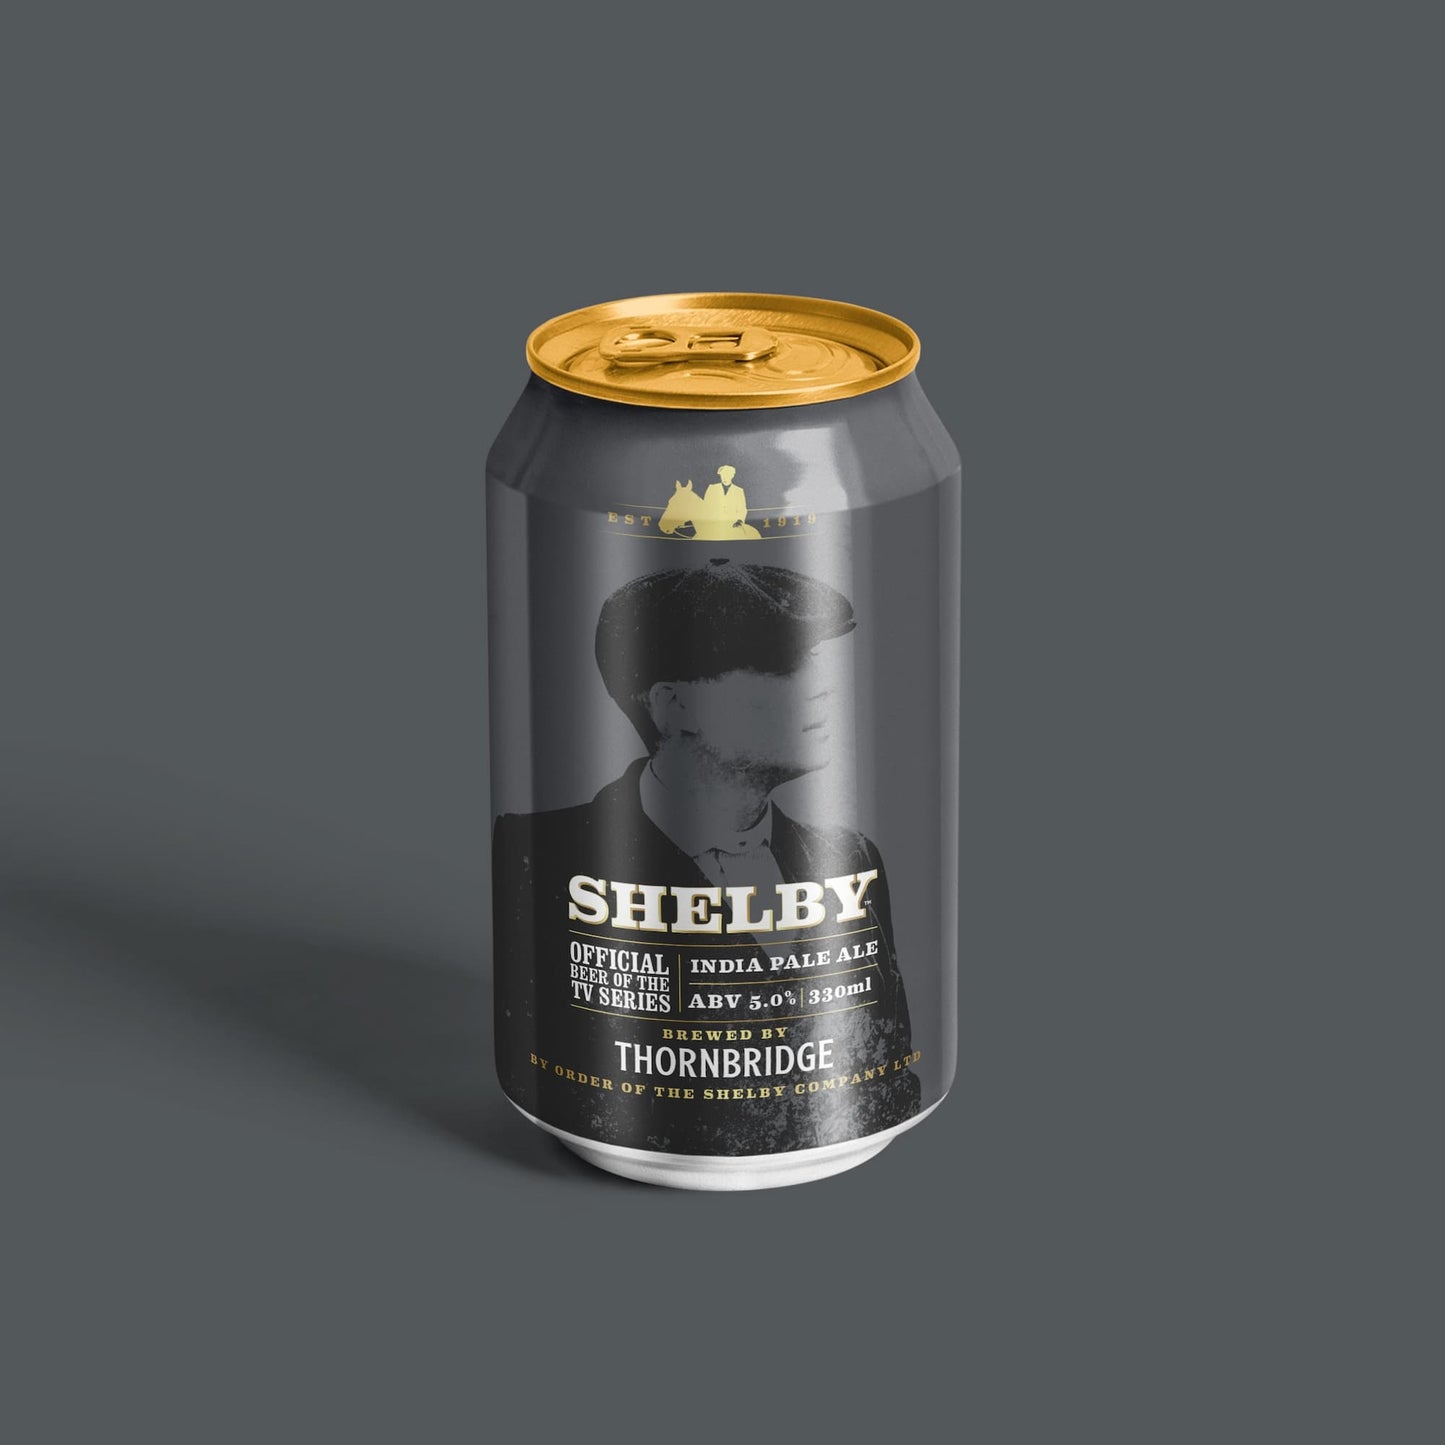 Shelby - The Official Beer of the Peaky Blinders TV Series - 5% IPA 330ml can Beer - Single Can Thornbridge